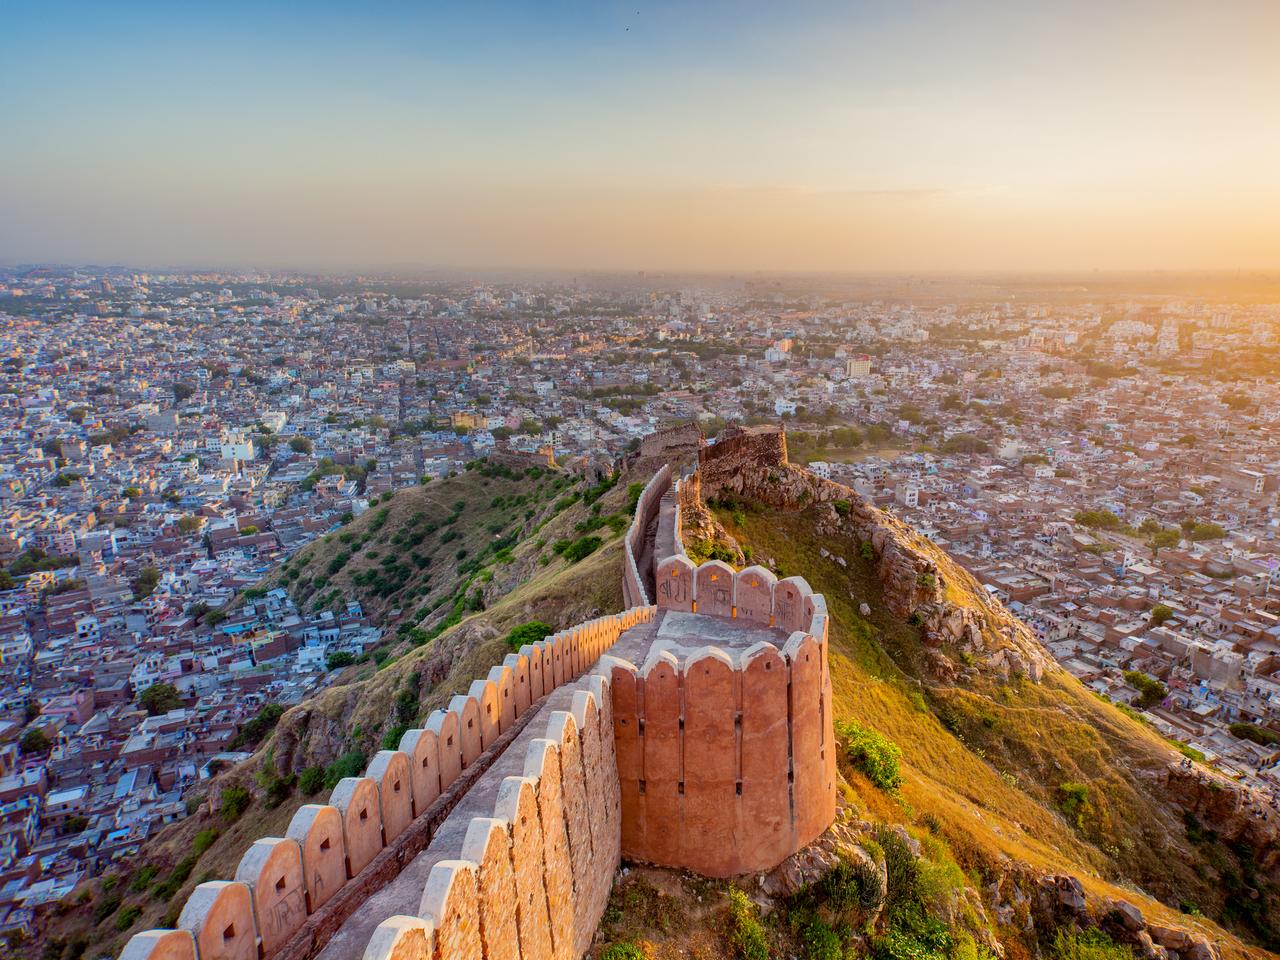 Aerial view of Jaipur from Nahargarh Fort at sunset